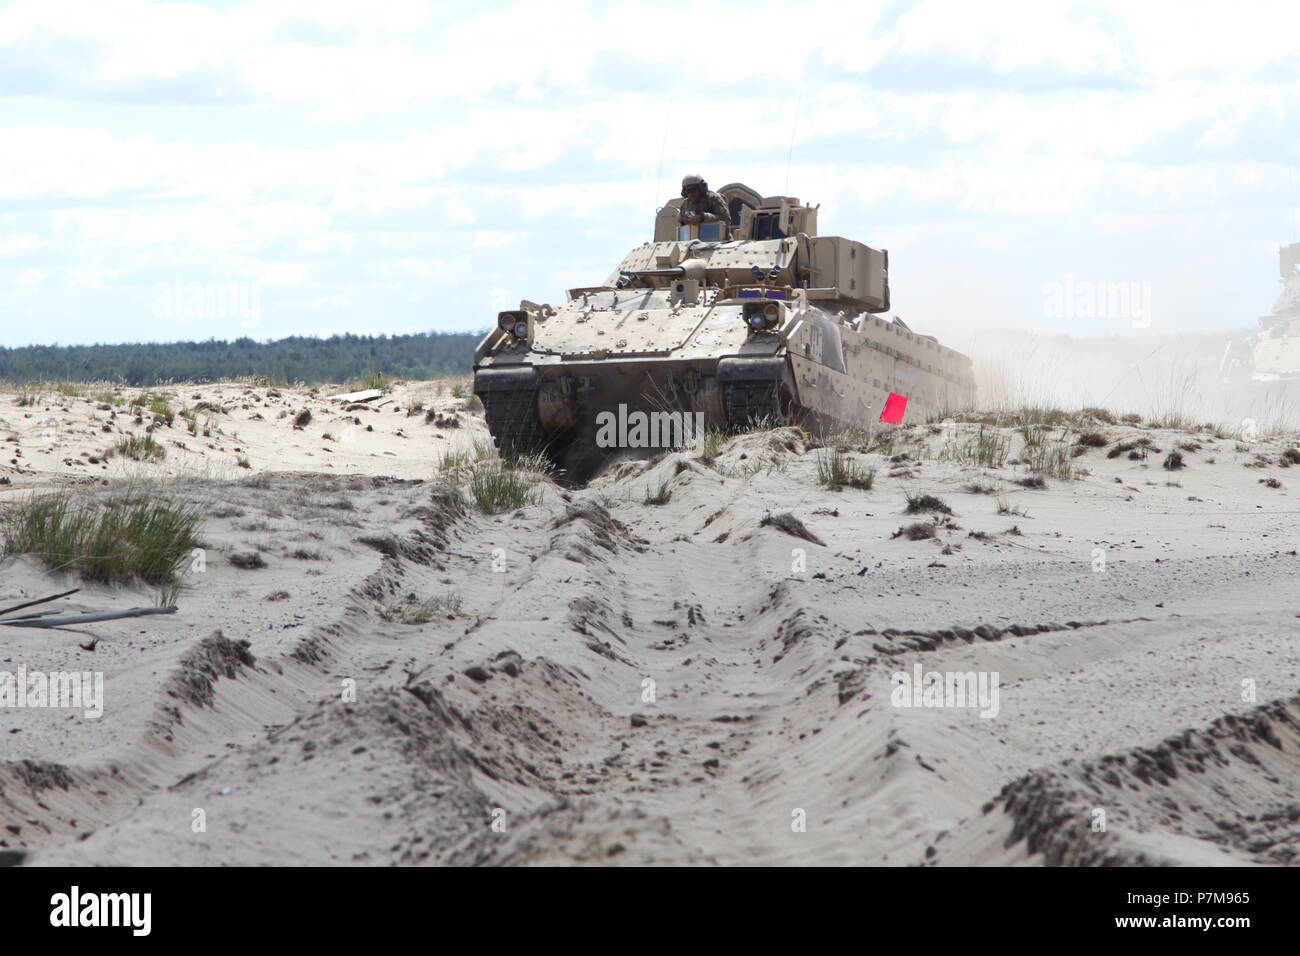 Soldiers assigned to 91st Brigade Engineer Battalion maneuver their Bradley Fighting Vehicle through the sand during the engineer qualification tables in Swietoszow, Poland, on June 30, 2017.  This culminating training event was a preparation event for a company-level combined arms live fire exercise in the near future. The unit is currently deployed in support of Atlantic Resolve in Europe. (U.S. Army National Guard photo by Staff Sgt. Ron Lee, 382nd Public Affairs Detachment, 1ABCT, 1CD/Released) Stock Photo